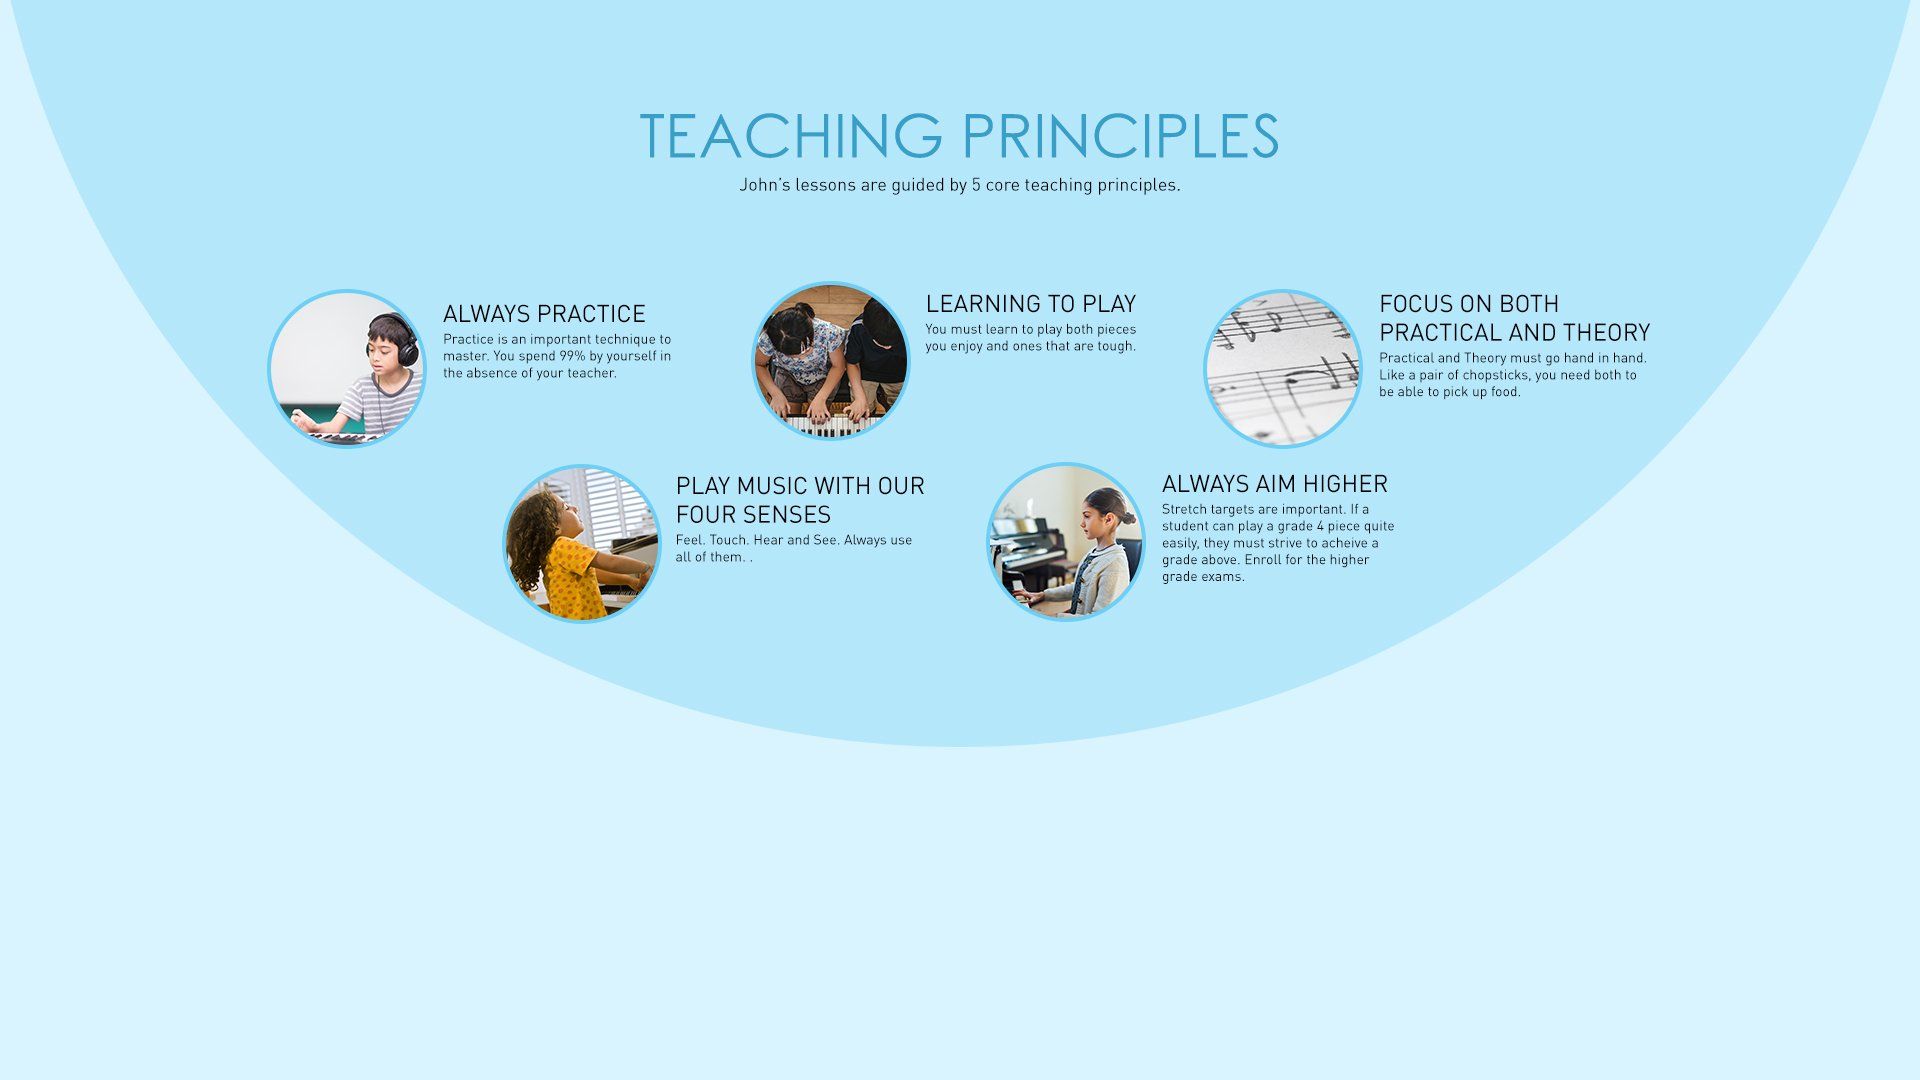 5 core teaching principles Always practice, Learning to play, Focus on both practical and theory, play music with our four senses and Always aim higher